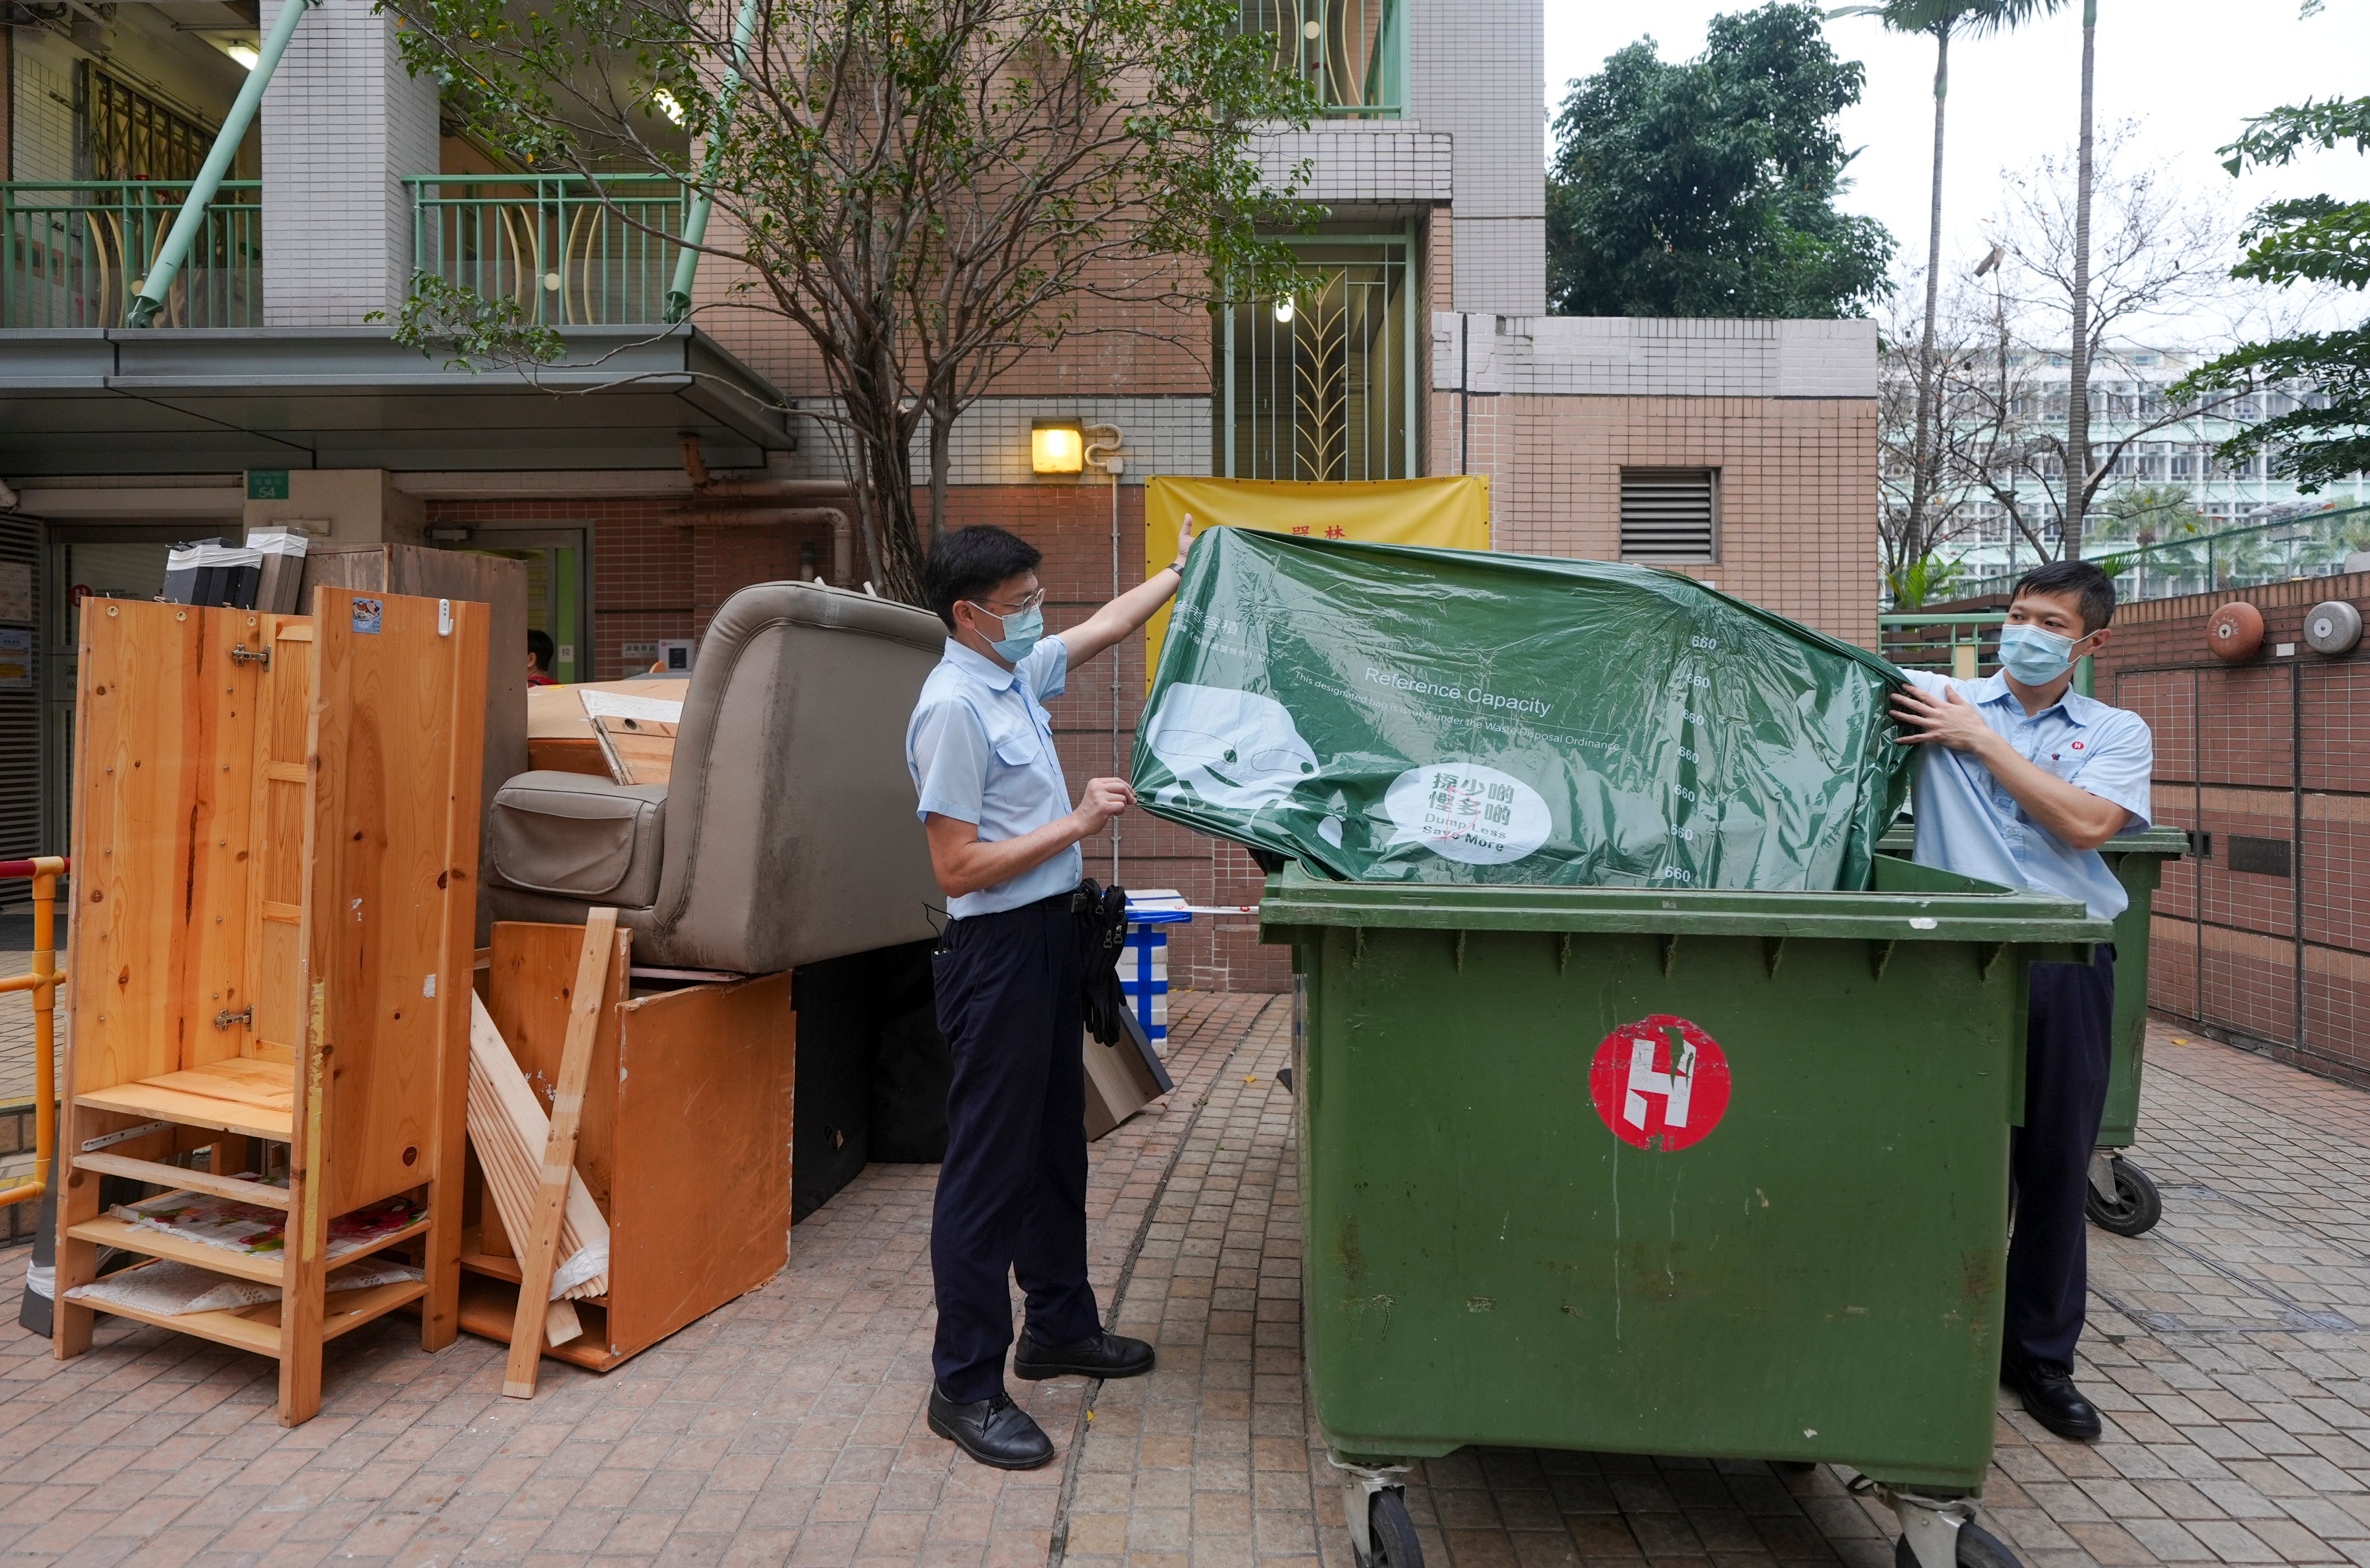 Authorities need to clear public confusion surrounding the waste-charging scheme before implementing it, one student writes. Photo: Eugene Lee